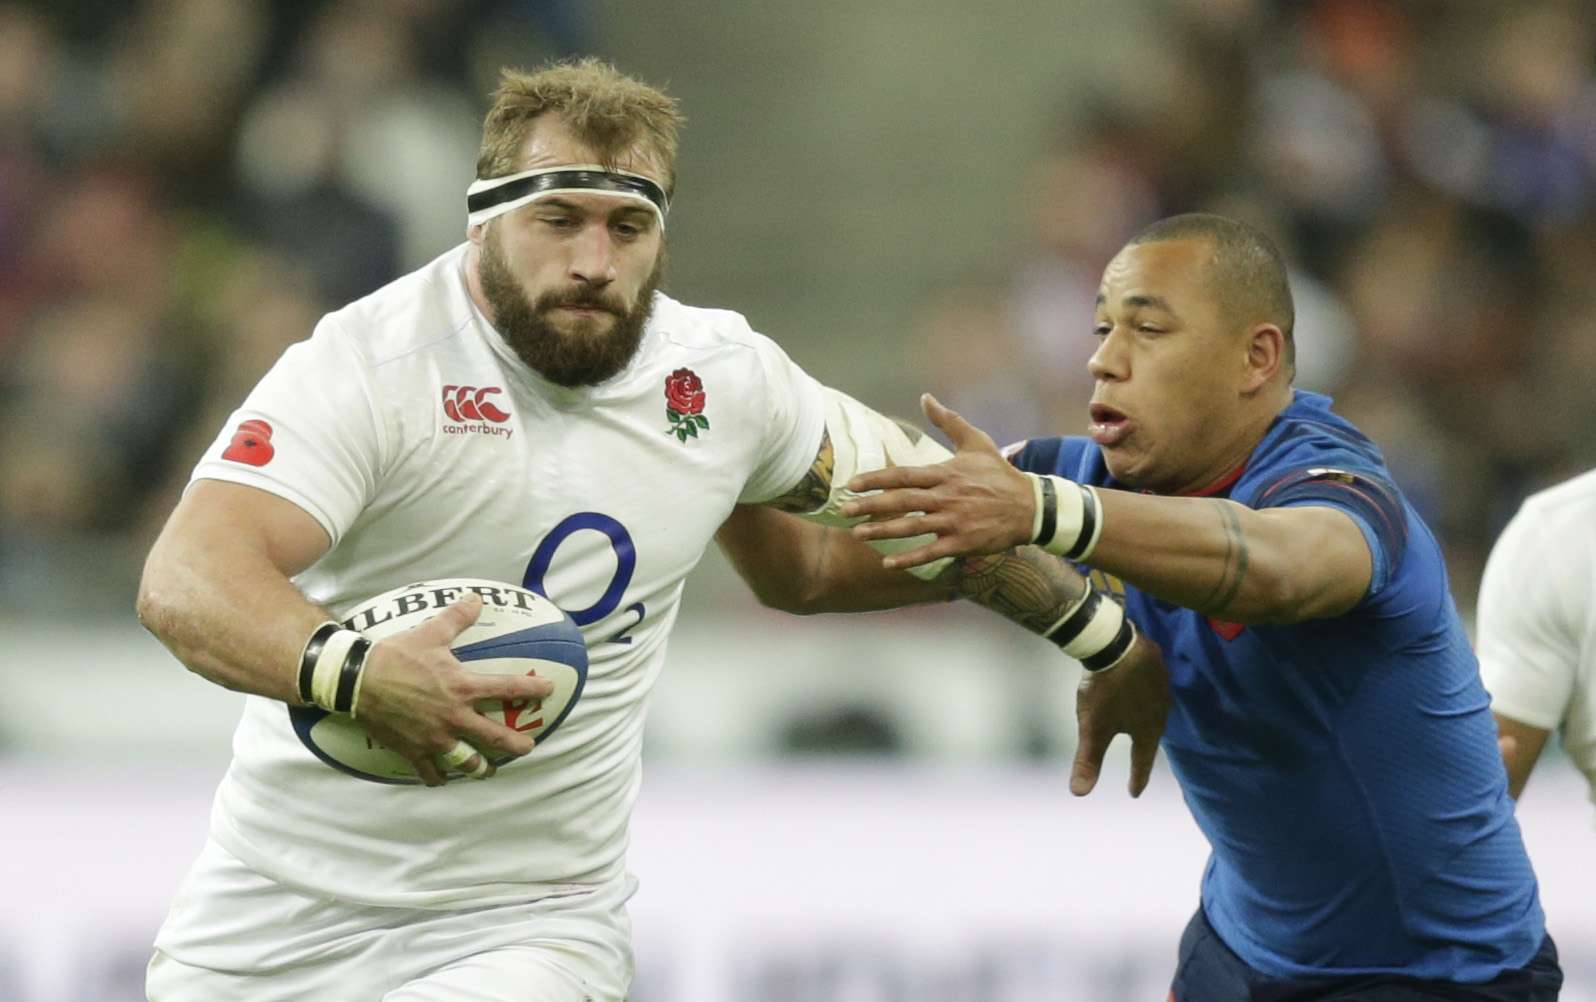 England are delighted to have Joe marler back ahead of the Six Nations Championship 2017. Photo: Reuters